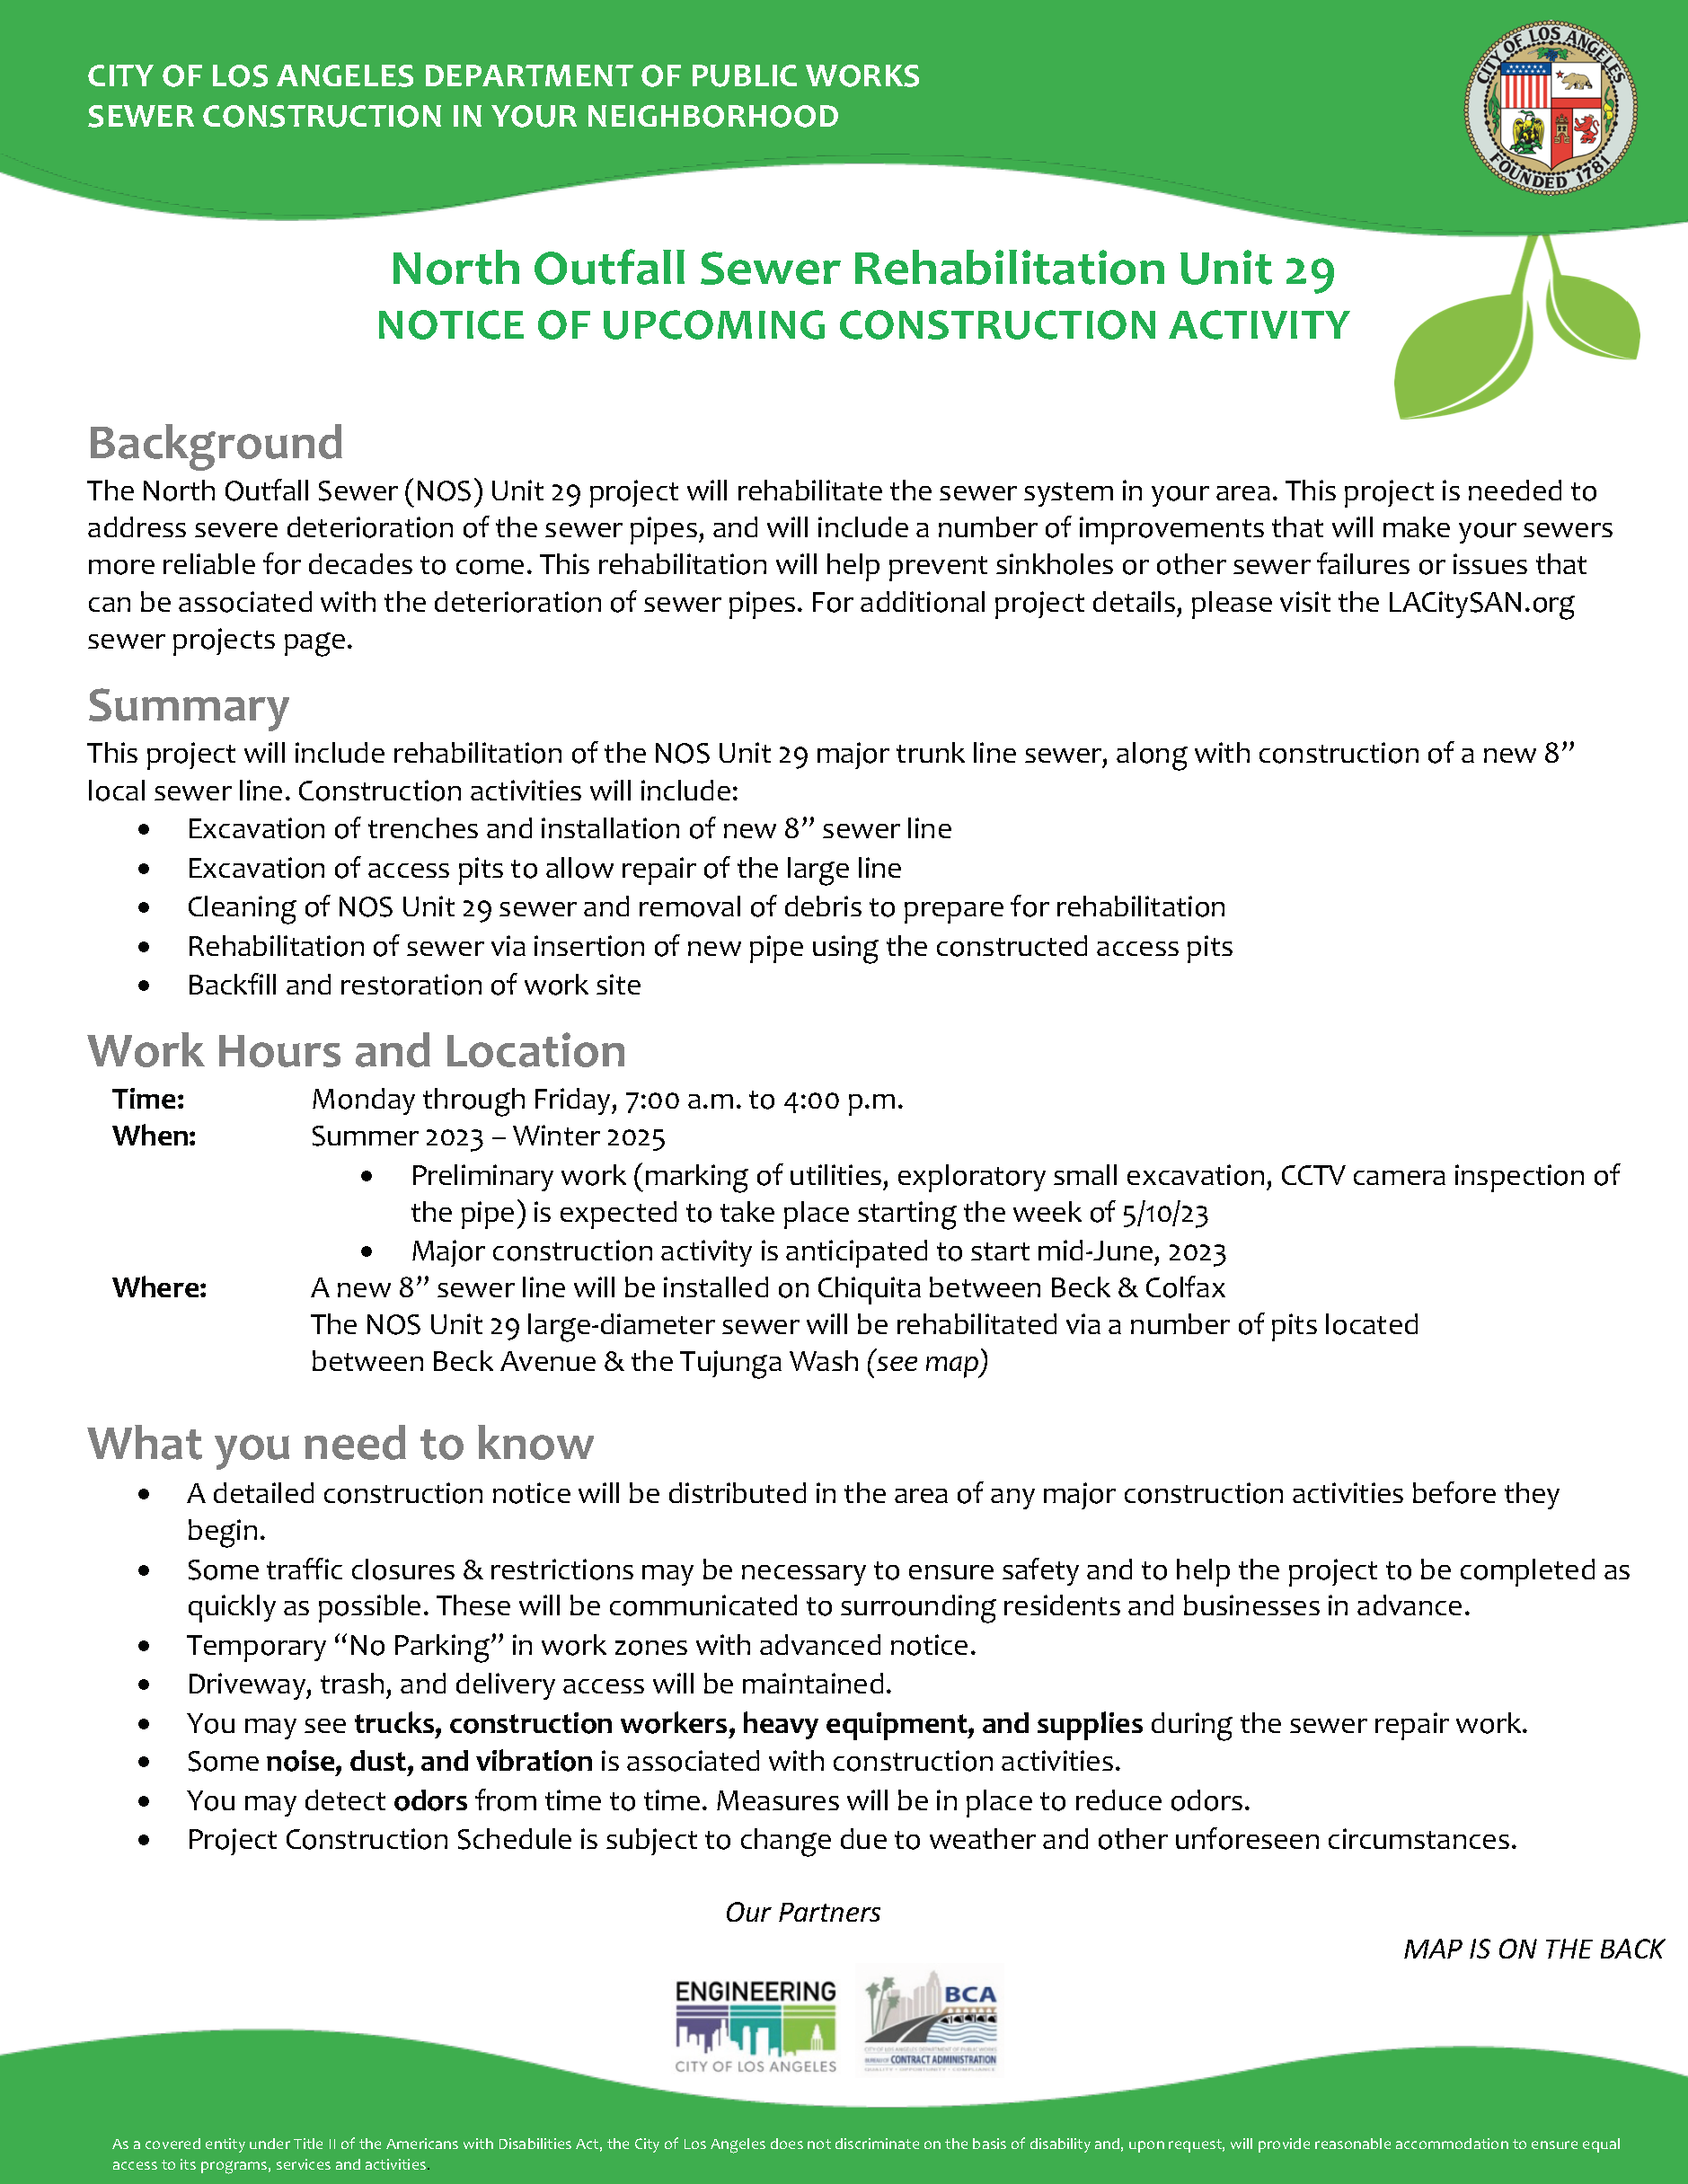 North Outfall Sewer Rehabilitation Unit 29 NOTICE OF UPCOMING CONSTRUCTION ACTIVITY